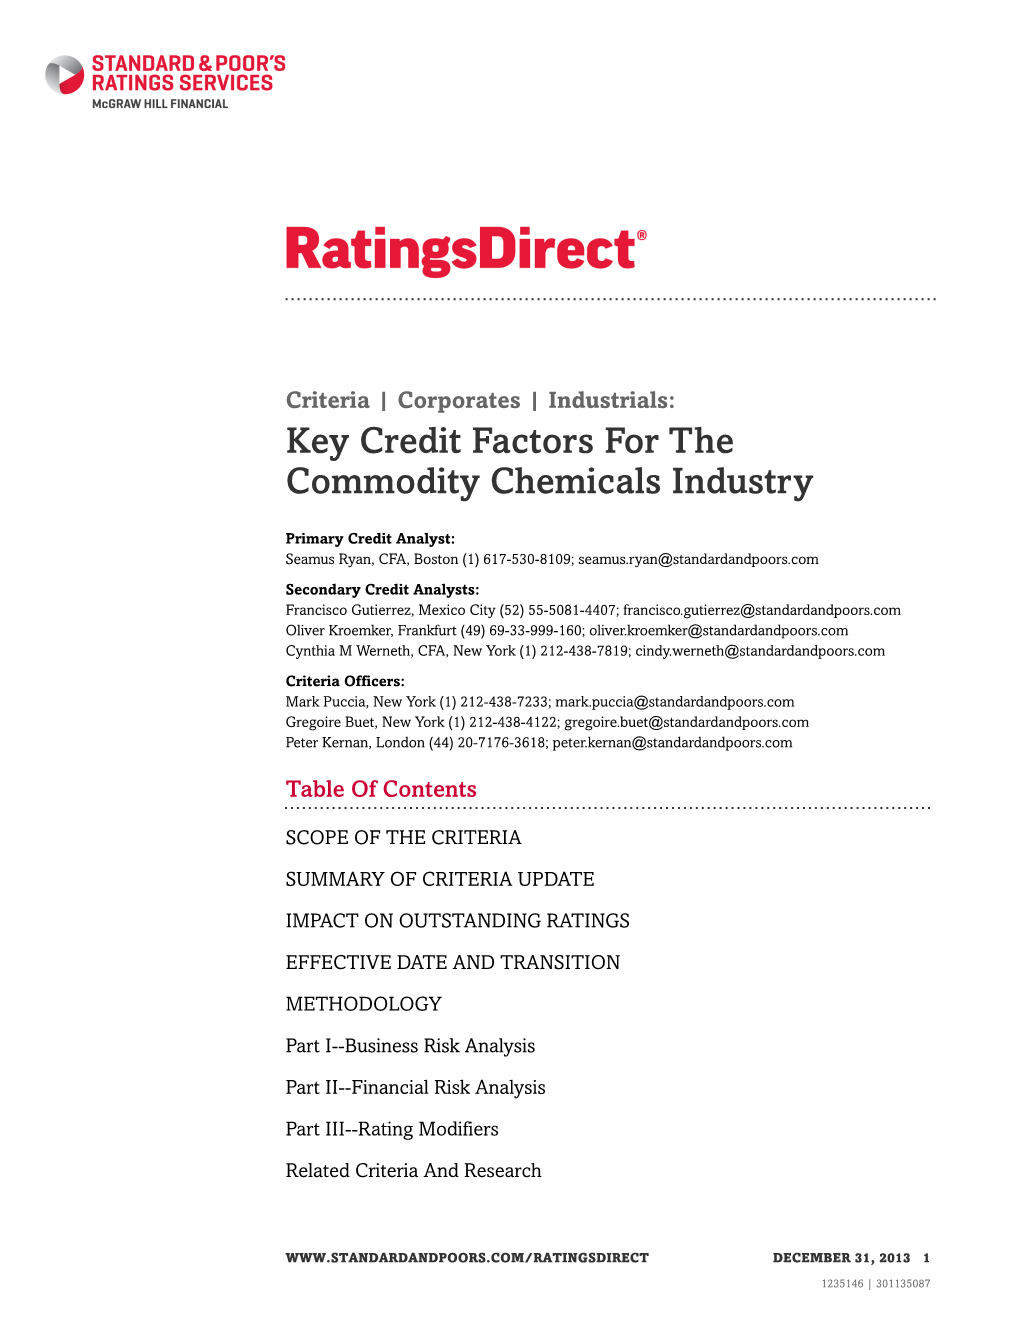 Key Credit Factors for the Commodity Chemicals Industry